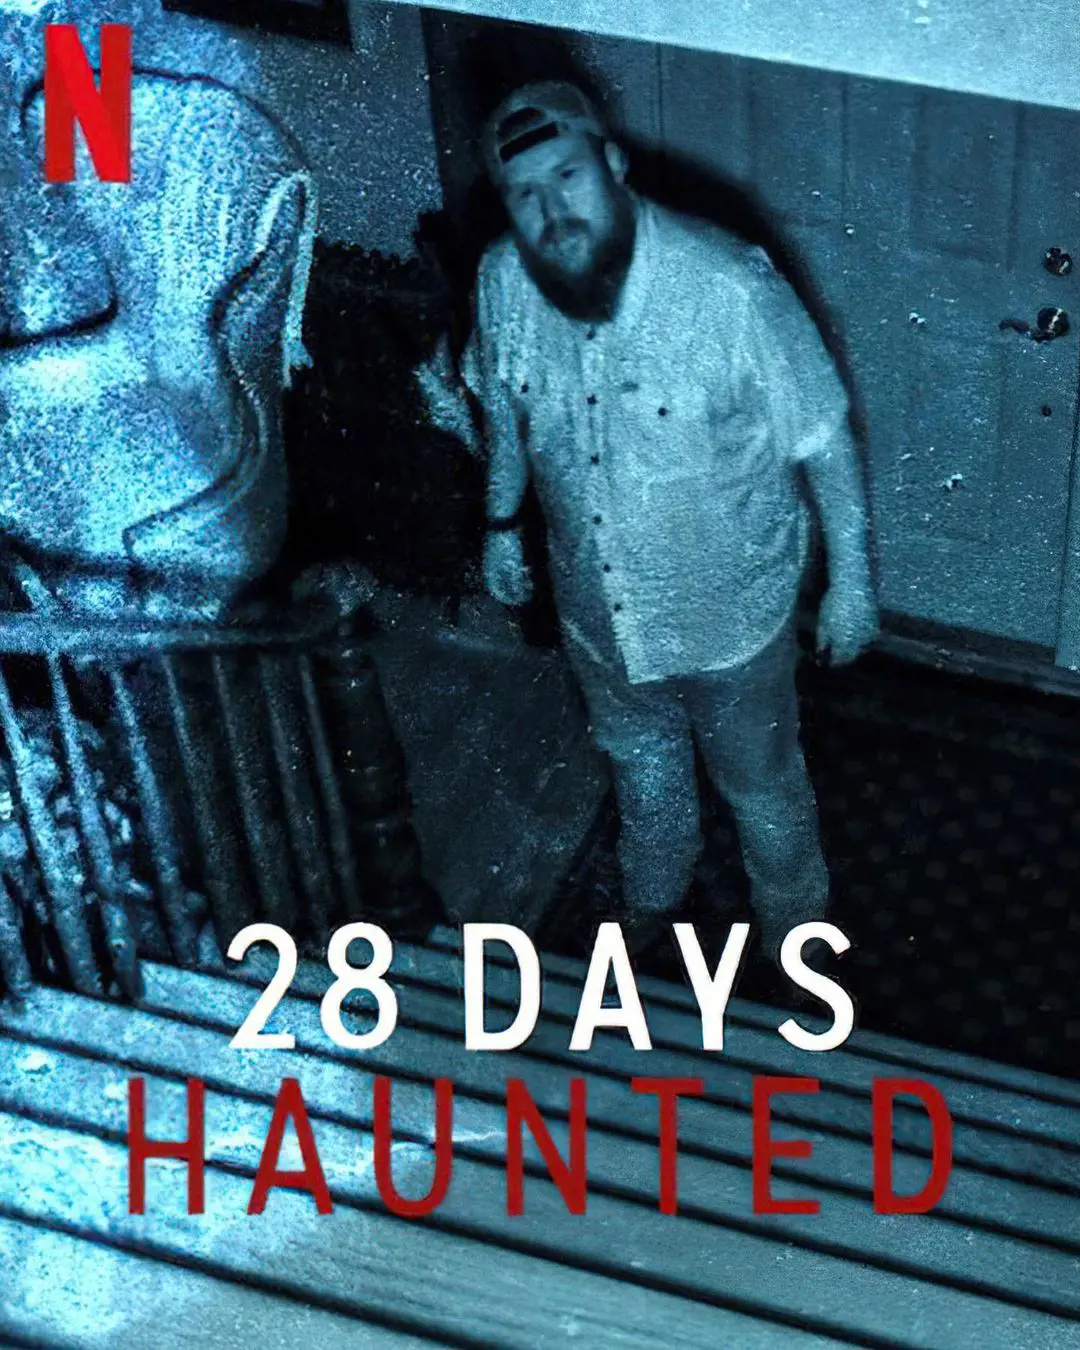 The Netflix original series 28 Days Haunted is a paranormal series, it was released on October 21, 2022